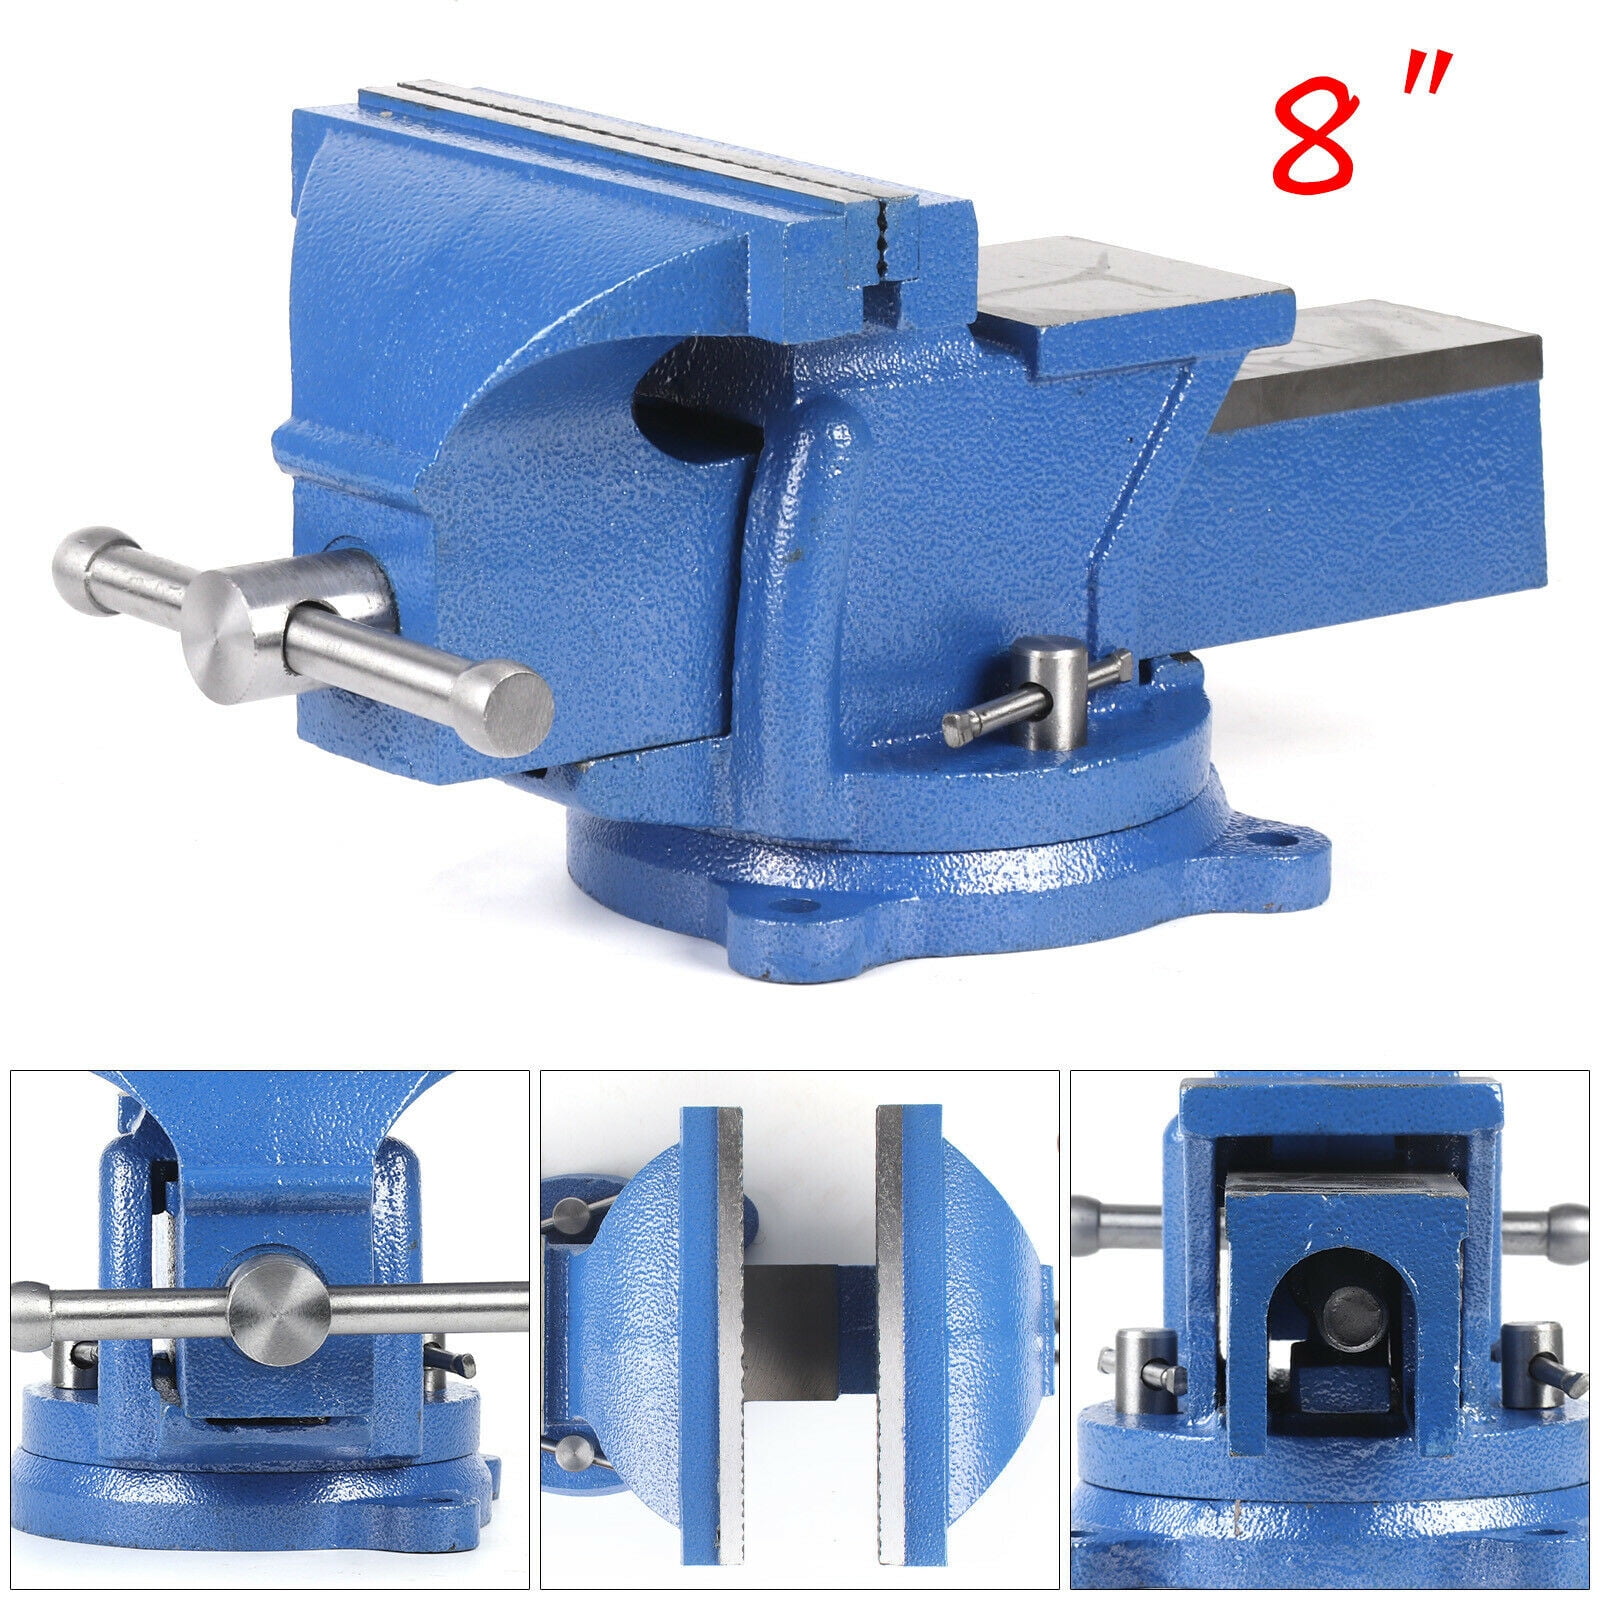 8'' Heavy Duty Work Bench Vice Engineer Jaw Swivel Base Workshop Vise Clamp New 